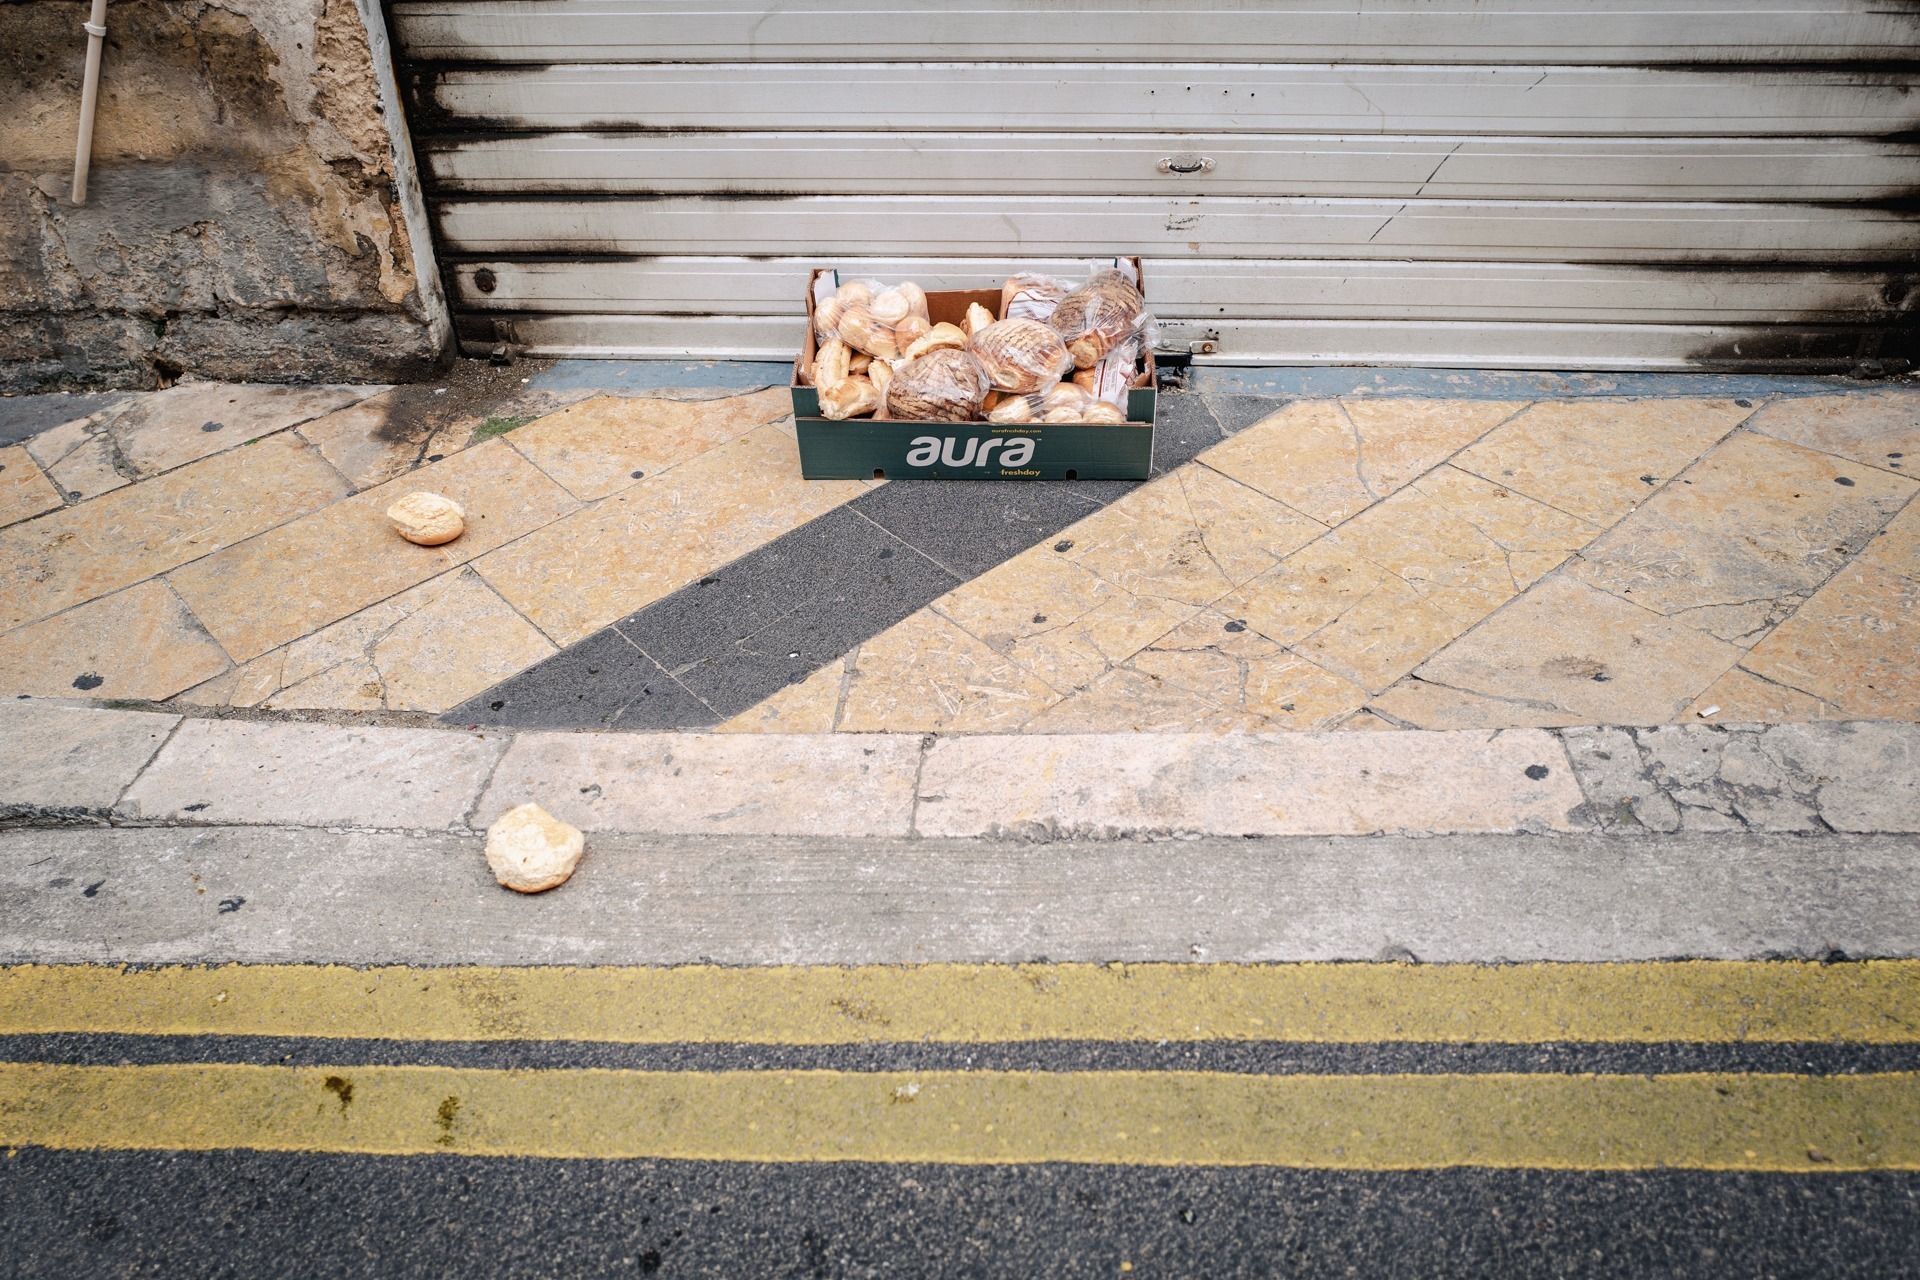 Bread left over in the streets of Valletta